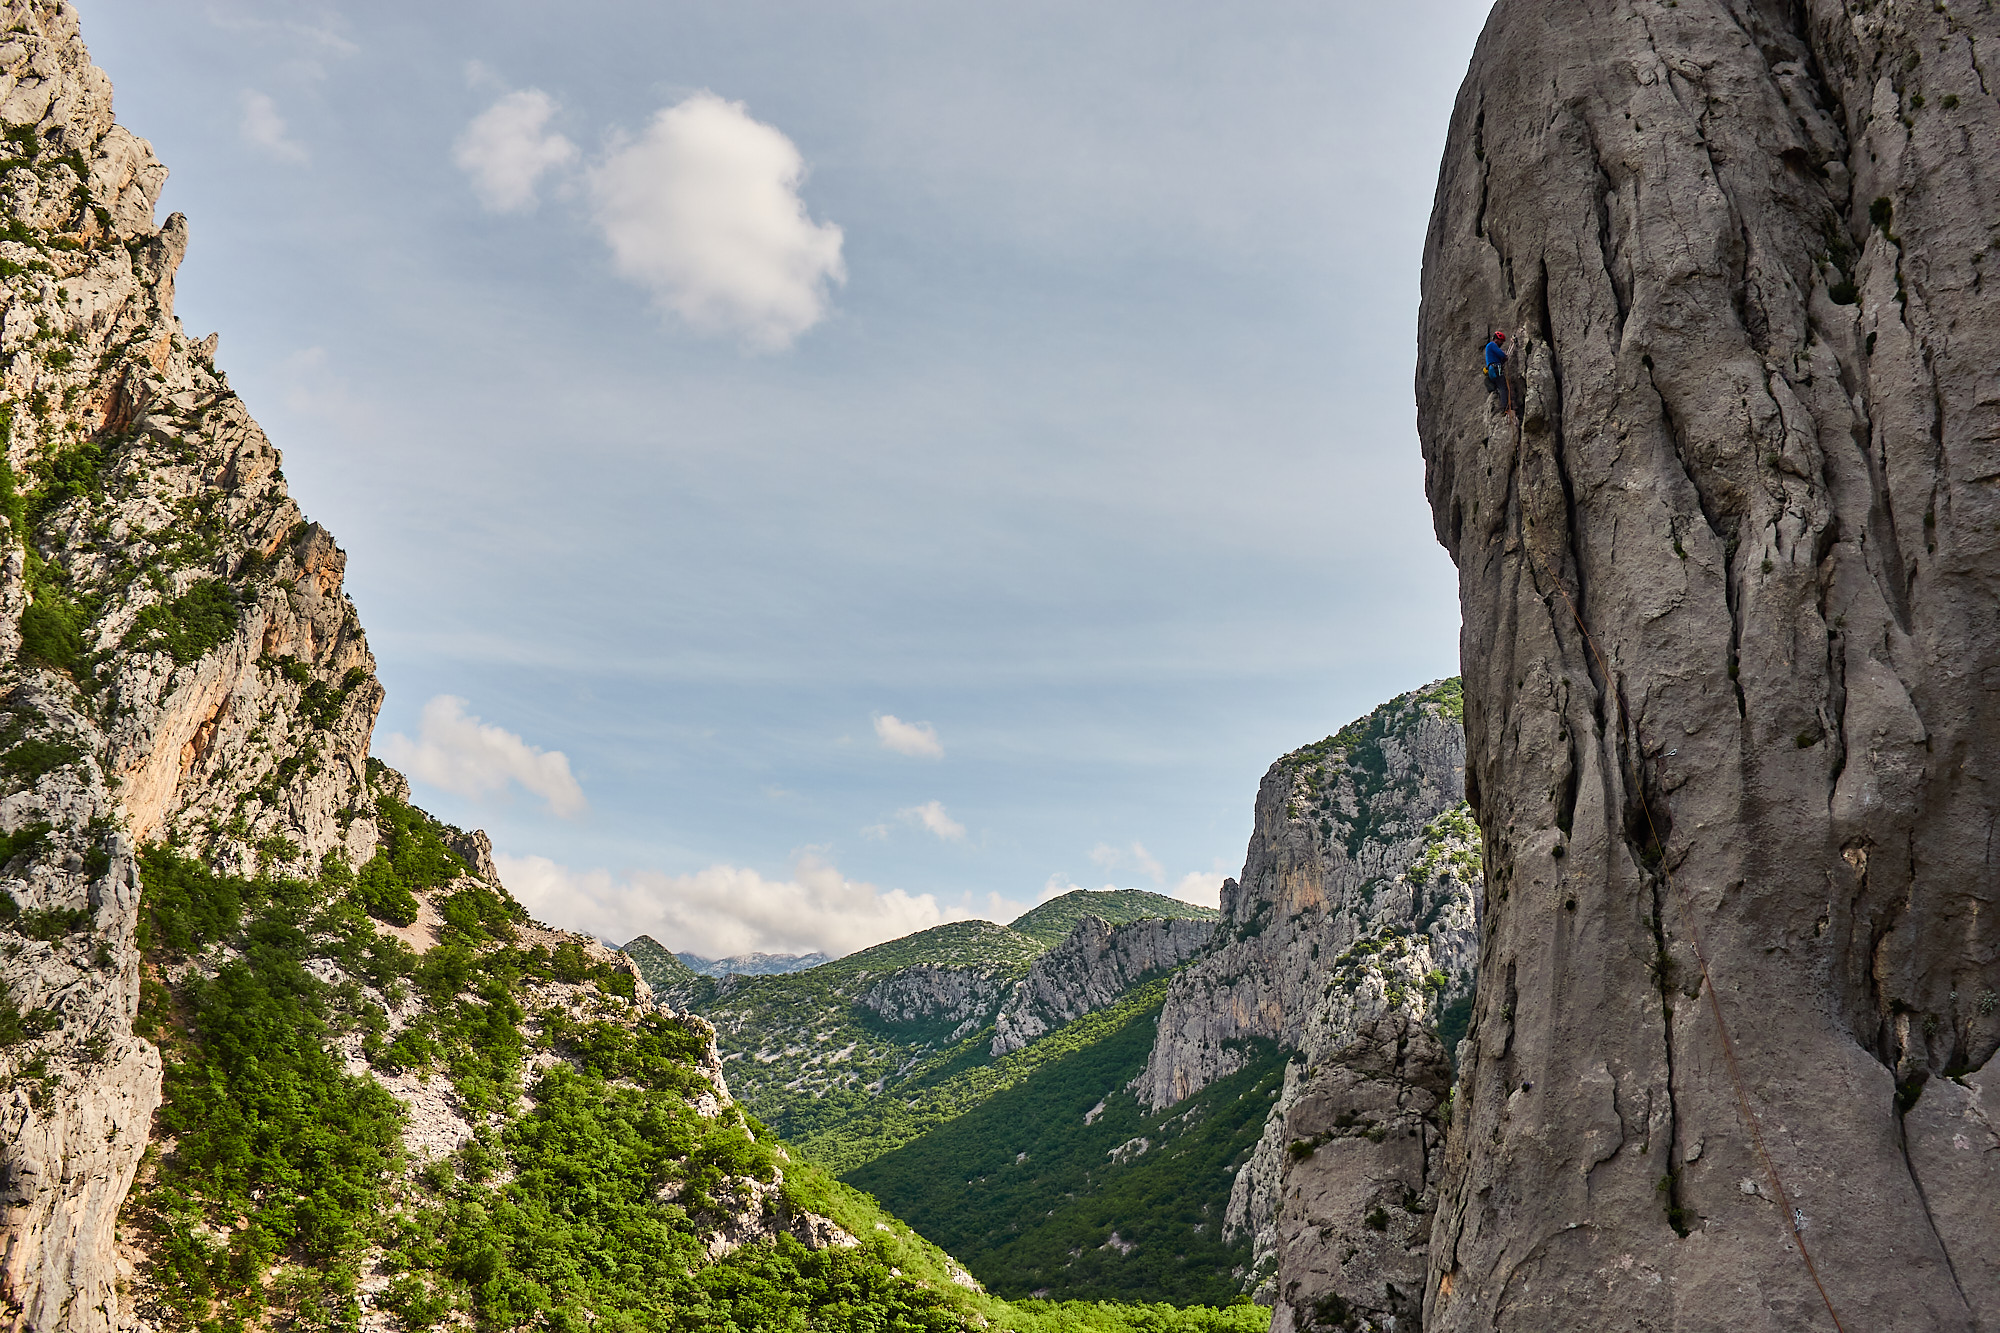 A climber at the end of the first pitch on a large limestone buttress called Stup on Anica Kuk in the Paklenica gorge in Croatia